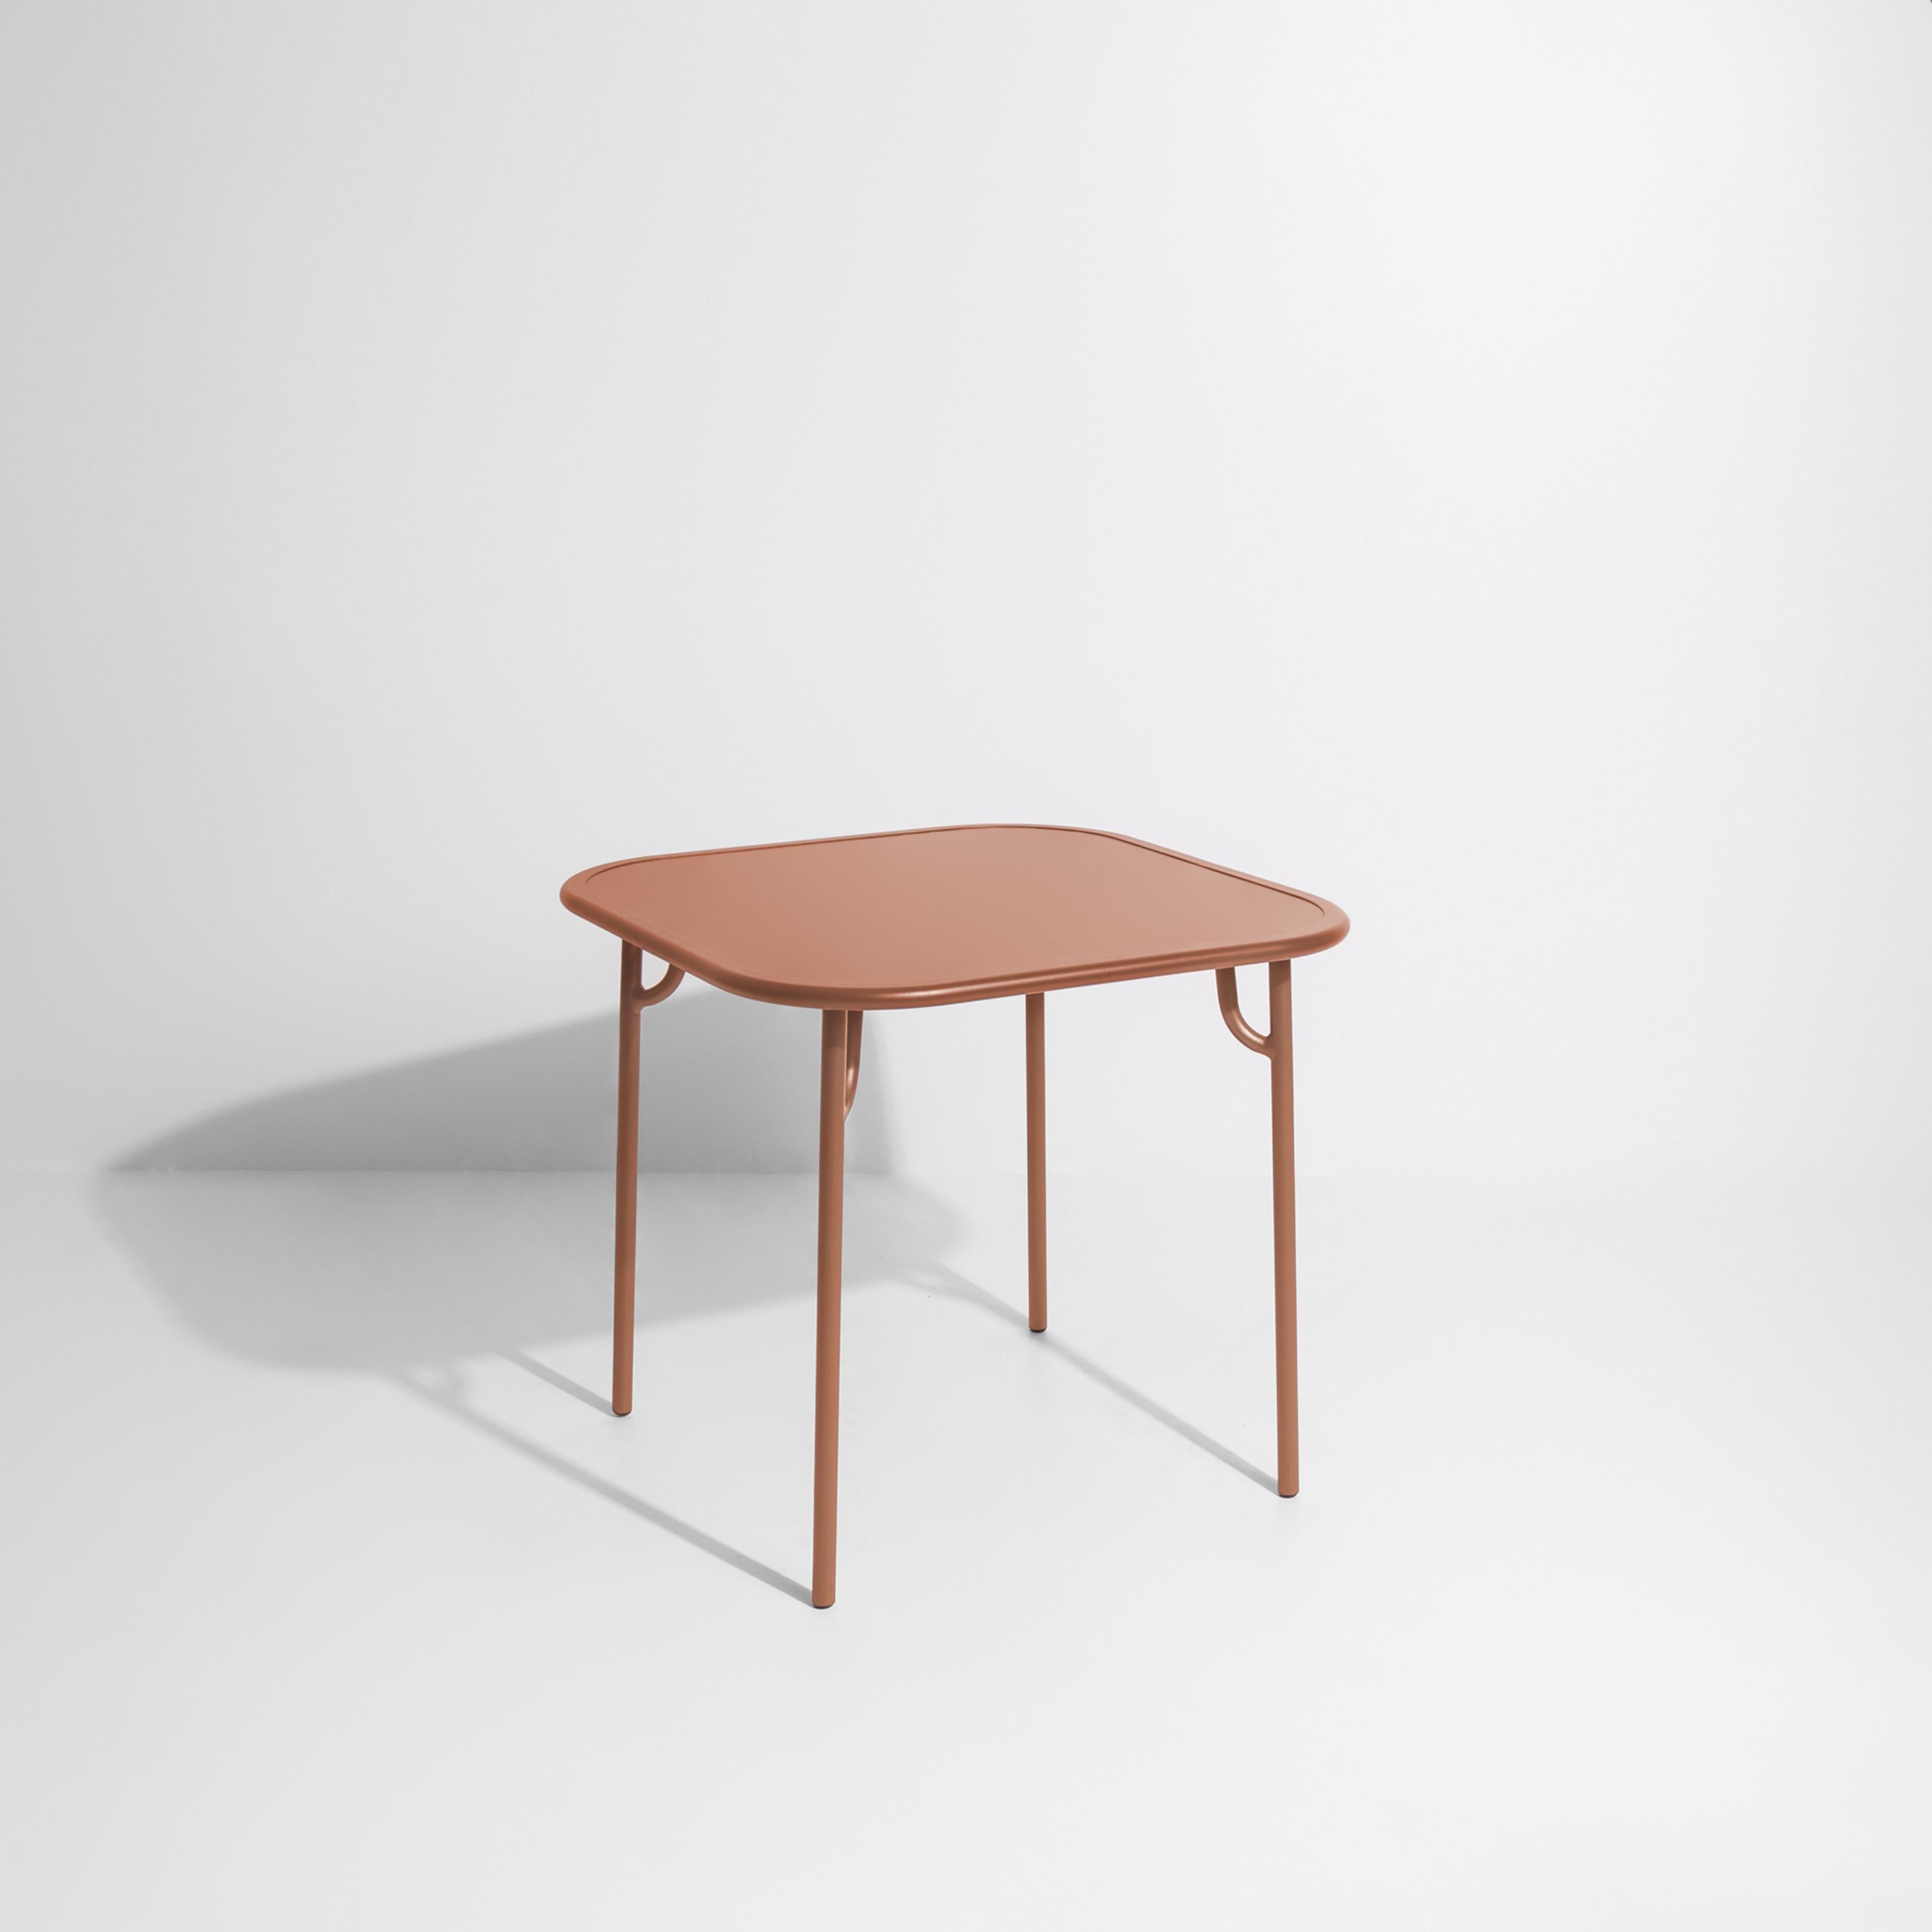 Petite Friture Week-End Plain Square Dining Table in Terracotta Aluminium by Studio BrichetZiegler, 2017

The week-end collection is a full range of outdoor furniture, in aluminium grained epoxy paint, matt finish, that includes 18 functions and 8